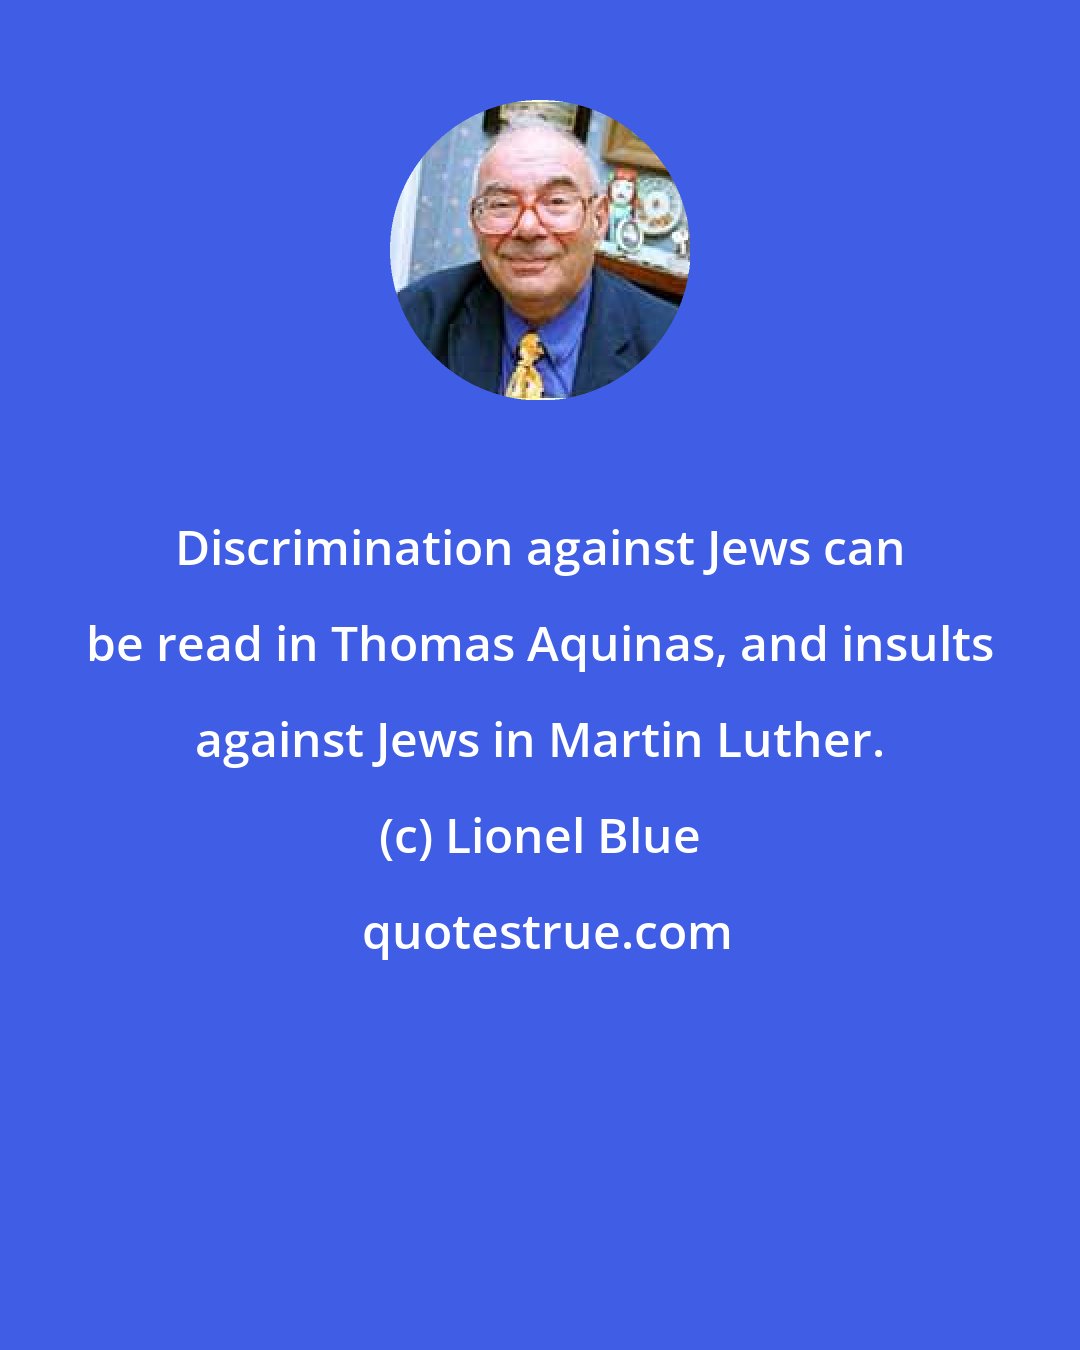 Lionel Blue: Discrimination against Jews can be read in Thomas Aquinas, and insults against Jews in Martin Luther.